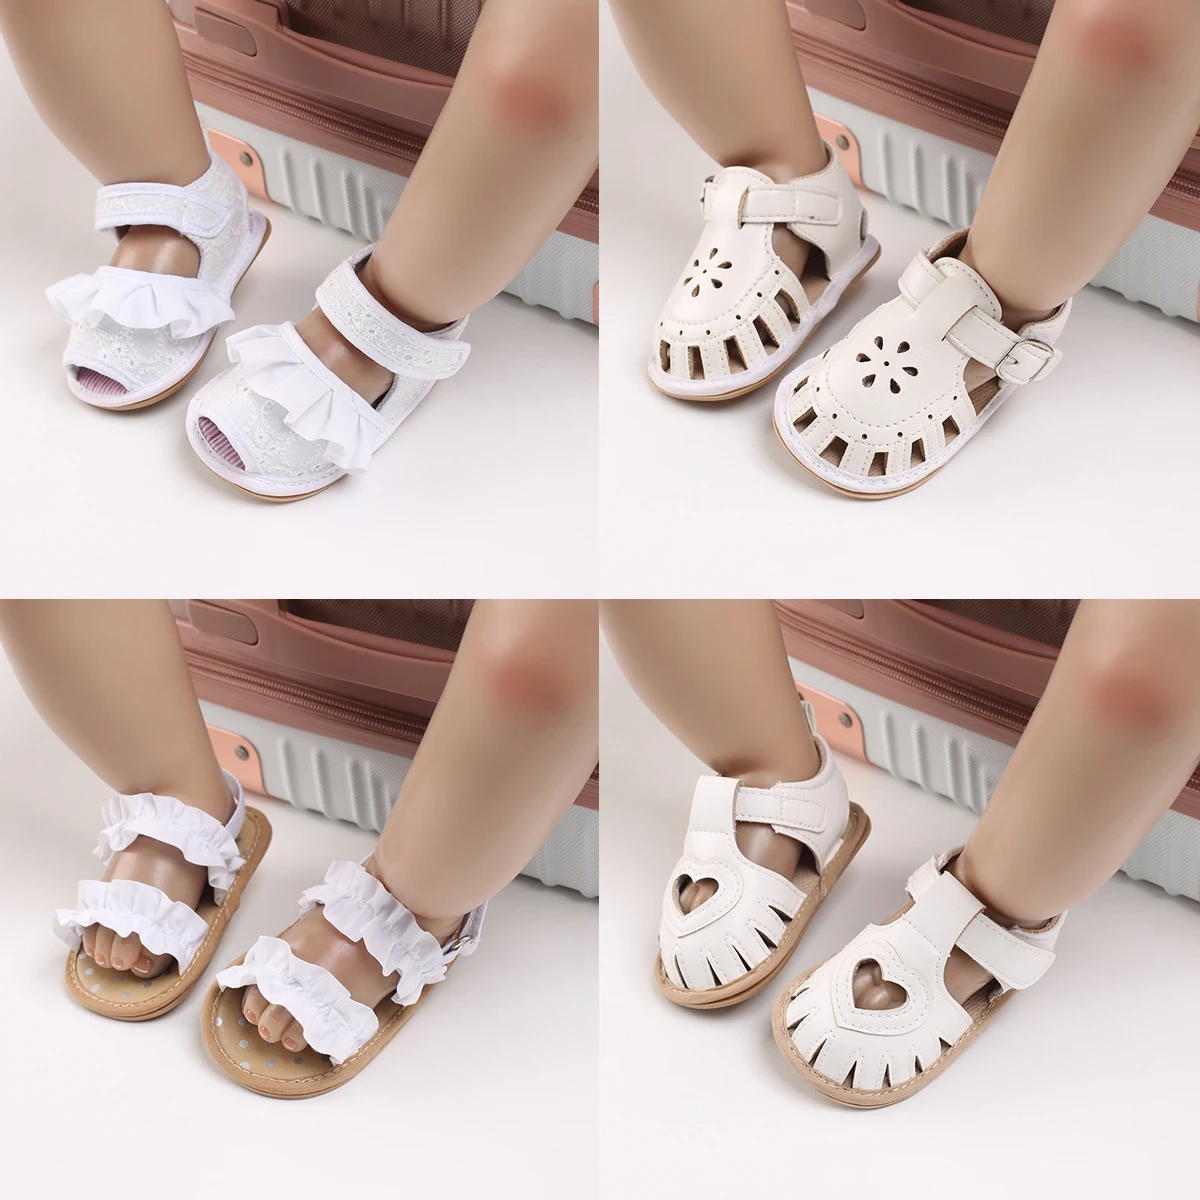 2022 Brand New Baby Shoes Girls Summer Casual Sandals Soft Rubber Sole Non-Slip First Walker White Baptism Toddler images - 6